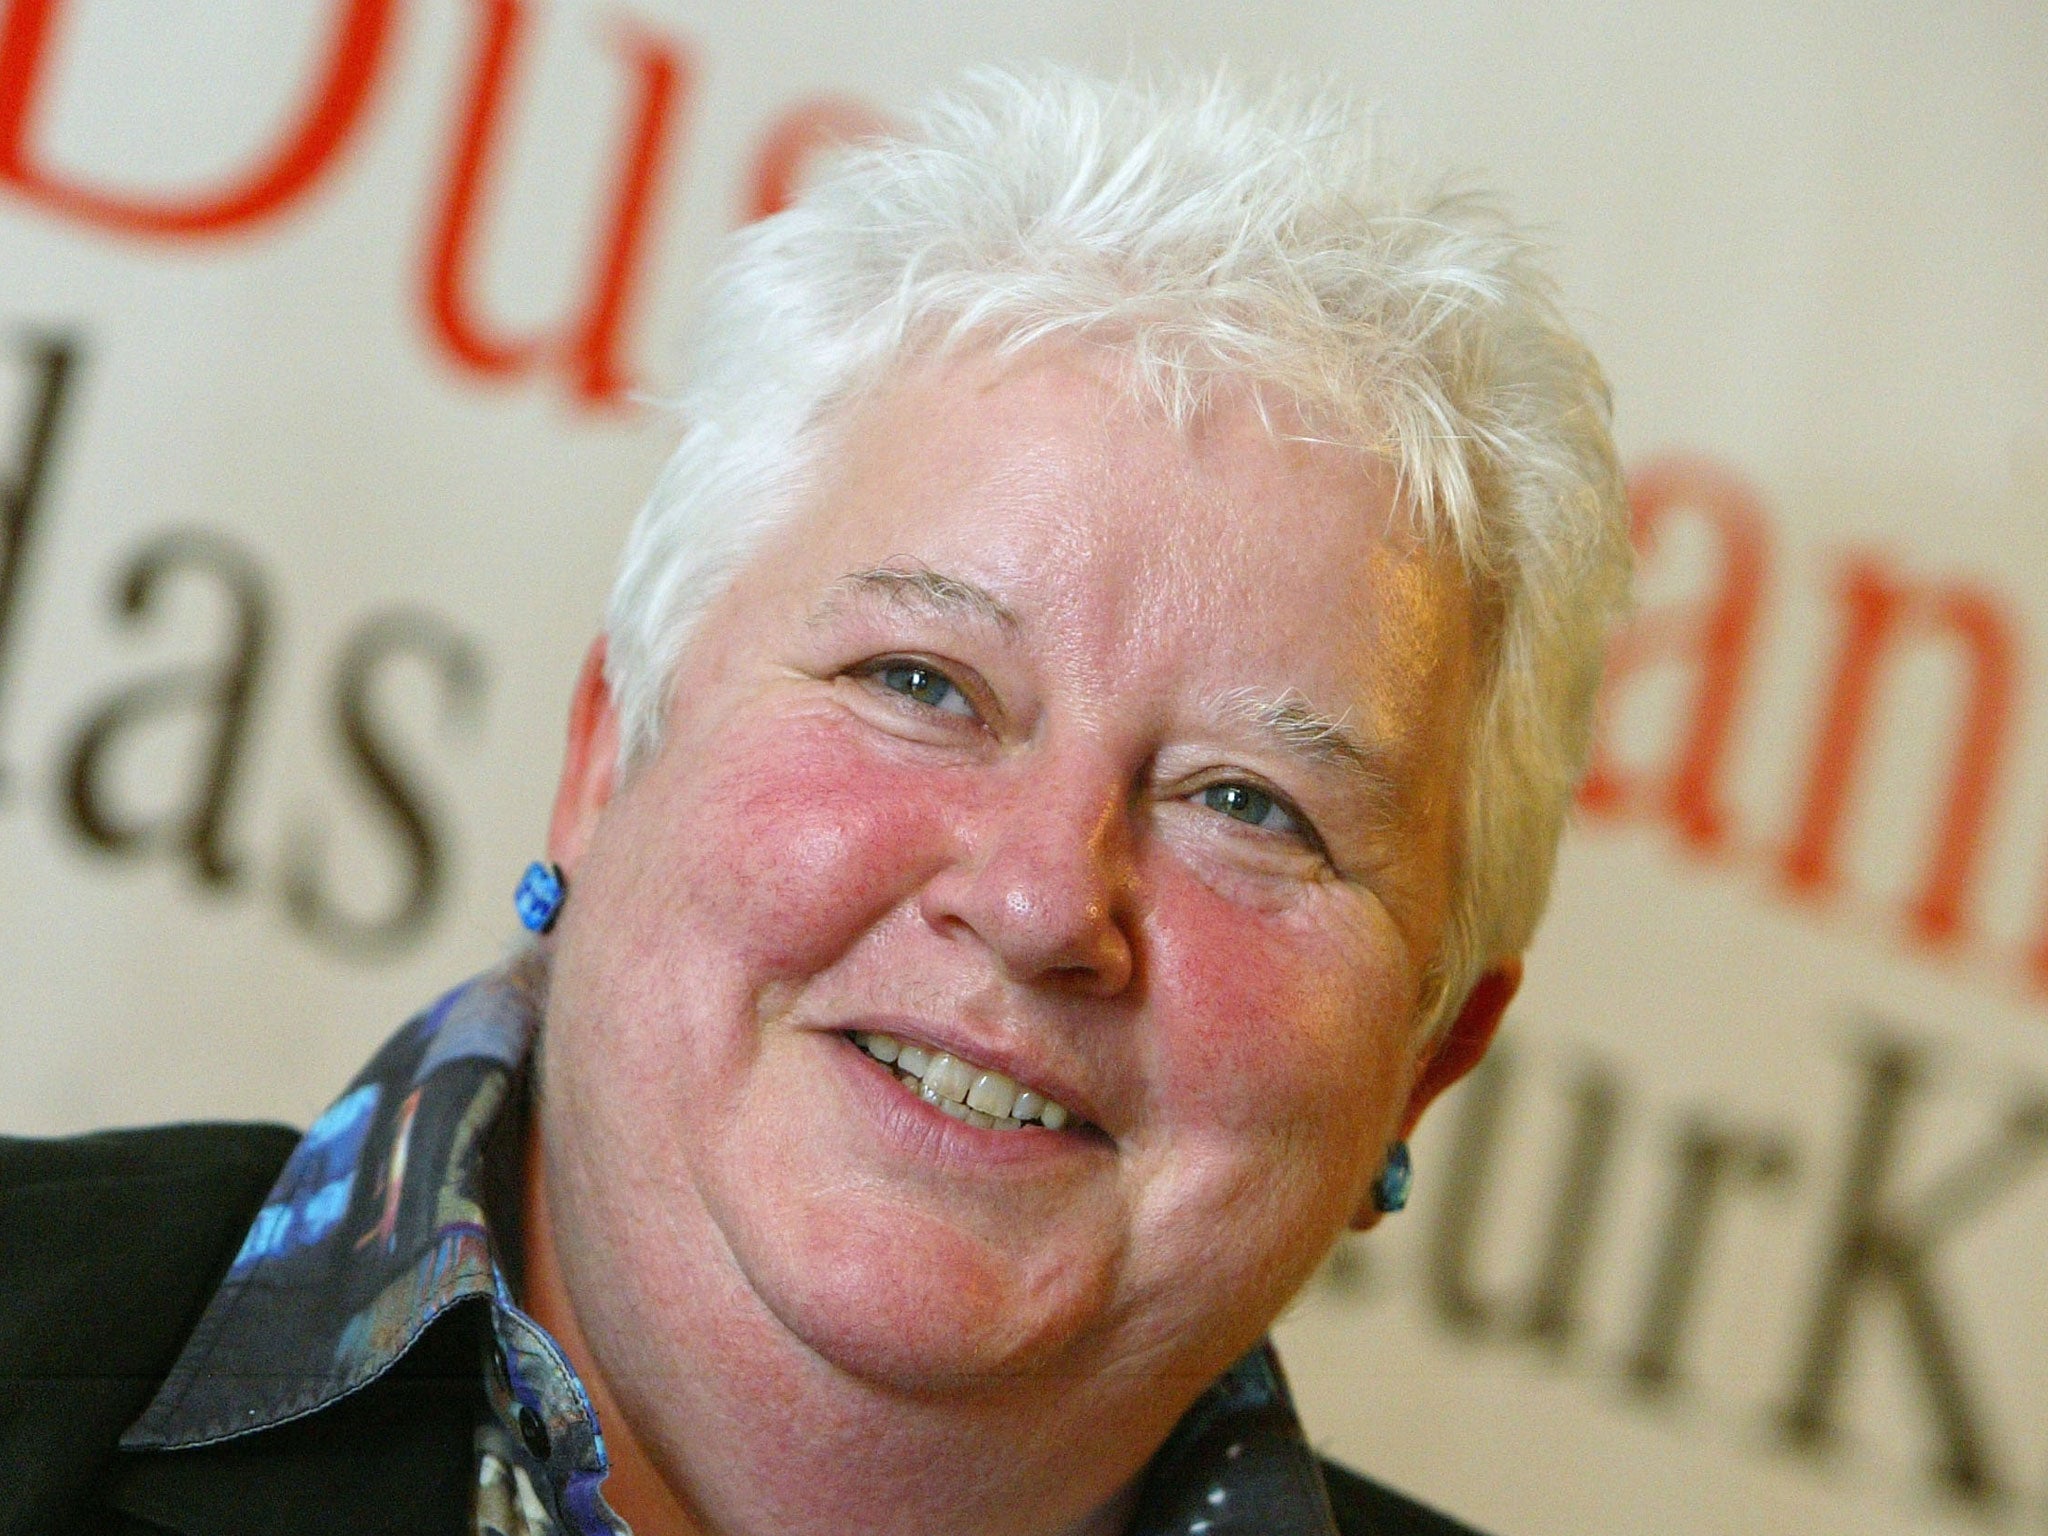 Scottish mystery writer Val McDermid voted 'yes' to independence and asks 'What happens now?'